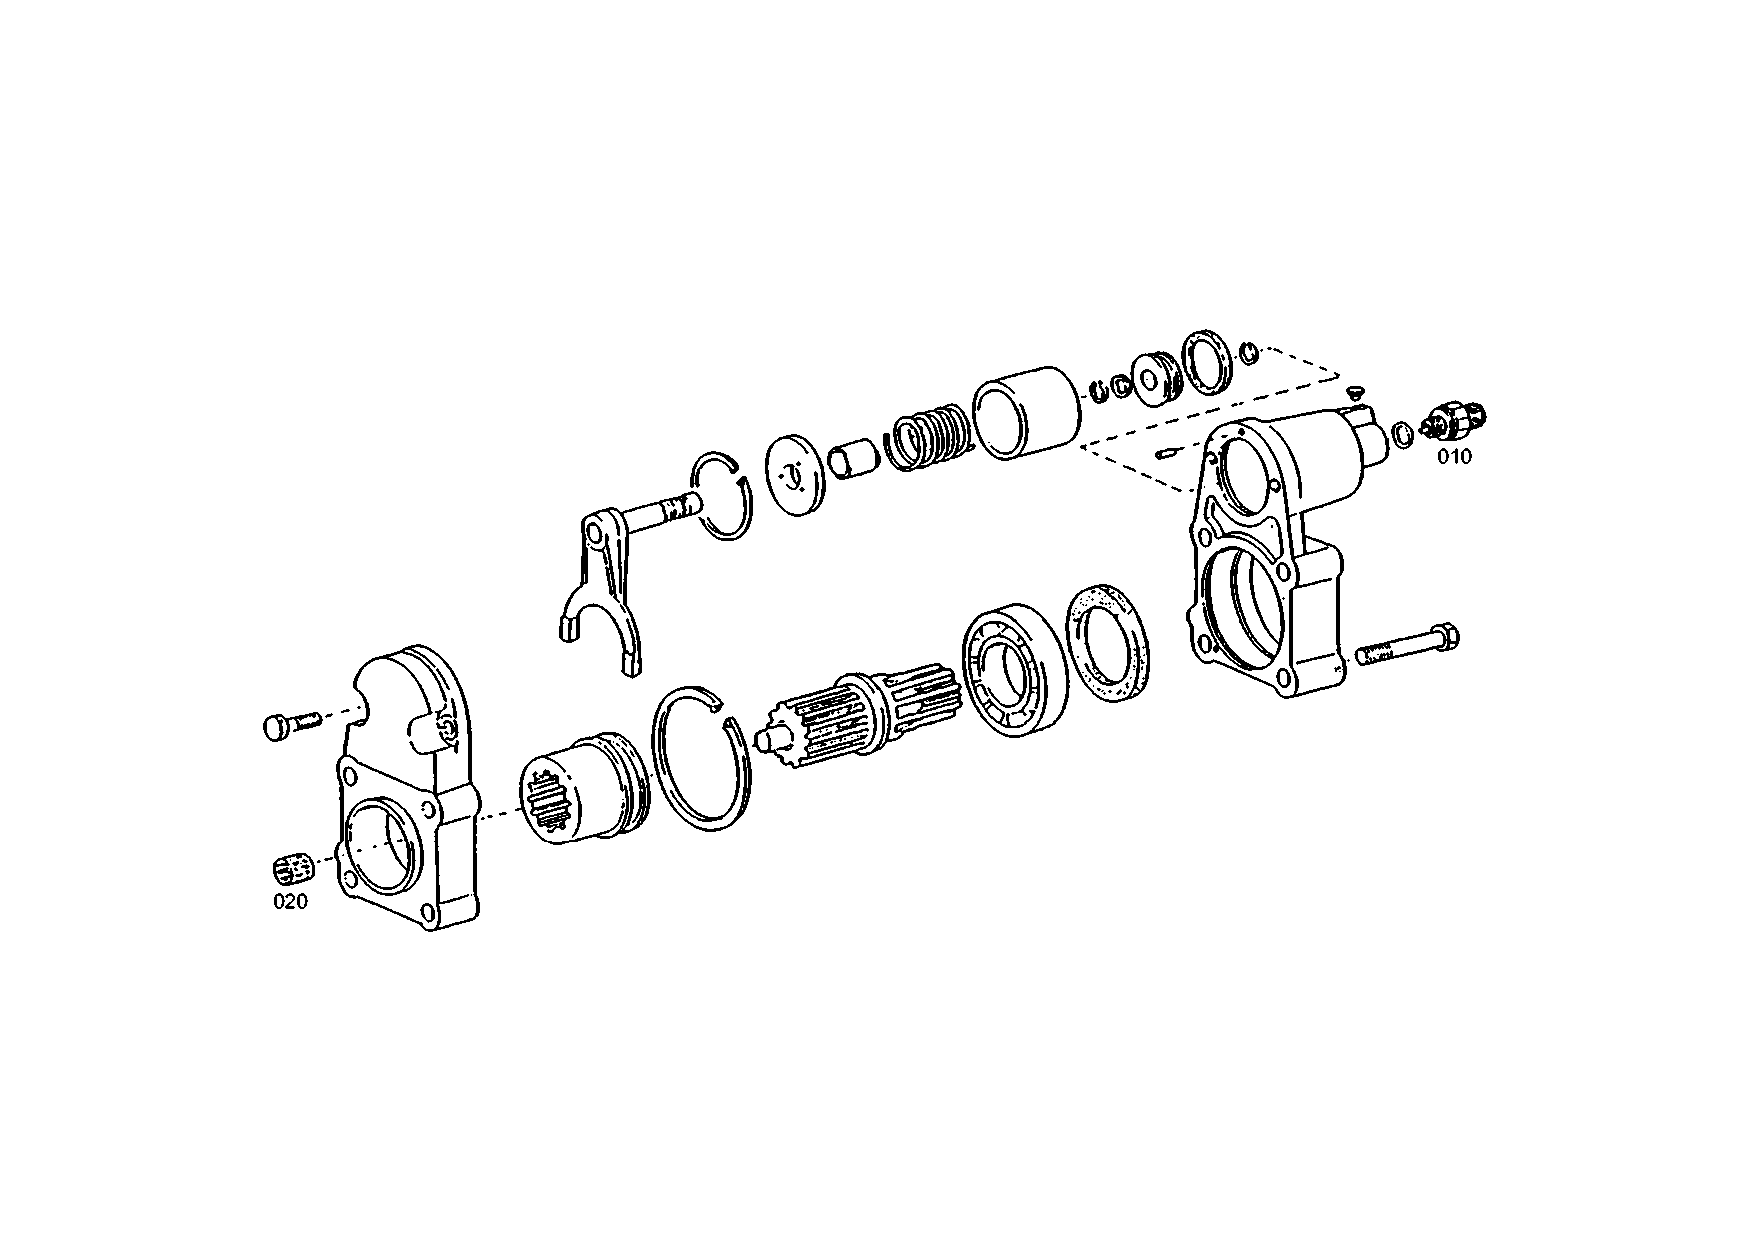 drawing for RENAULT 171200710001 - PRESSURE SWITCH (figure 1)